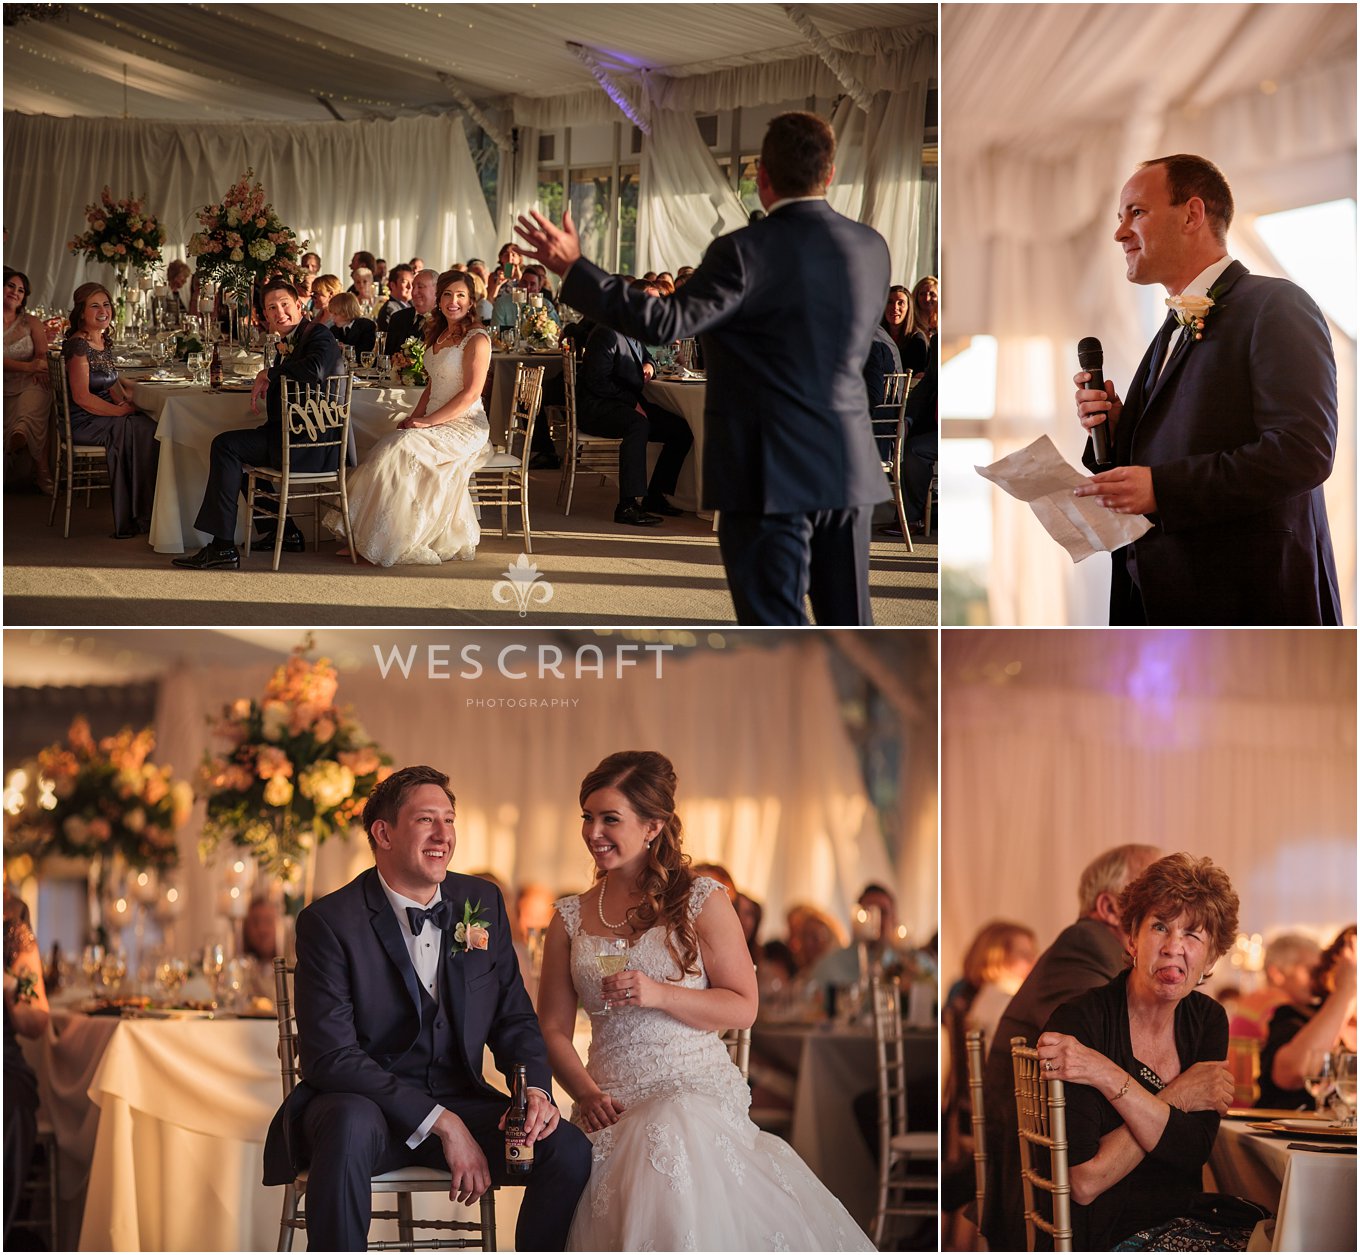 The toasts are always a lot of fun to capture as guests listen intently or laugh. Sometimes the reactions are downright wild.